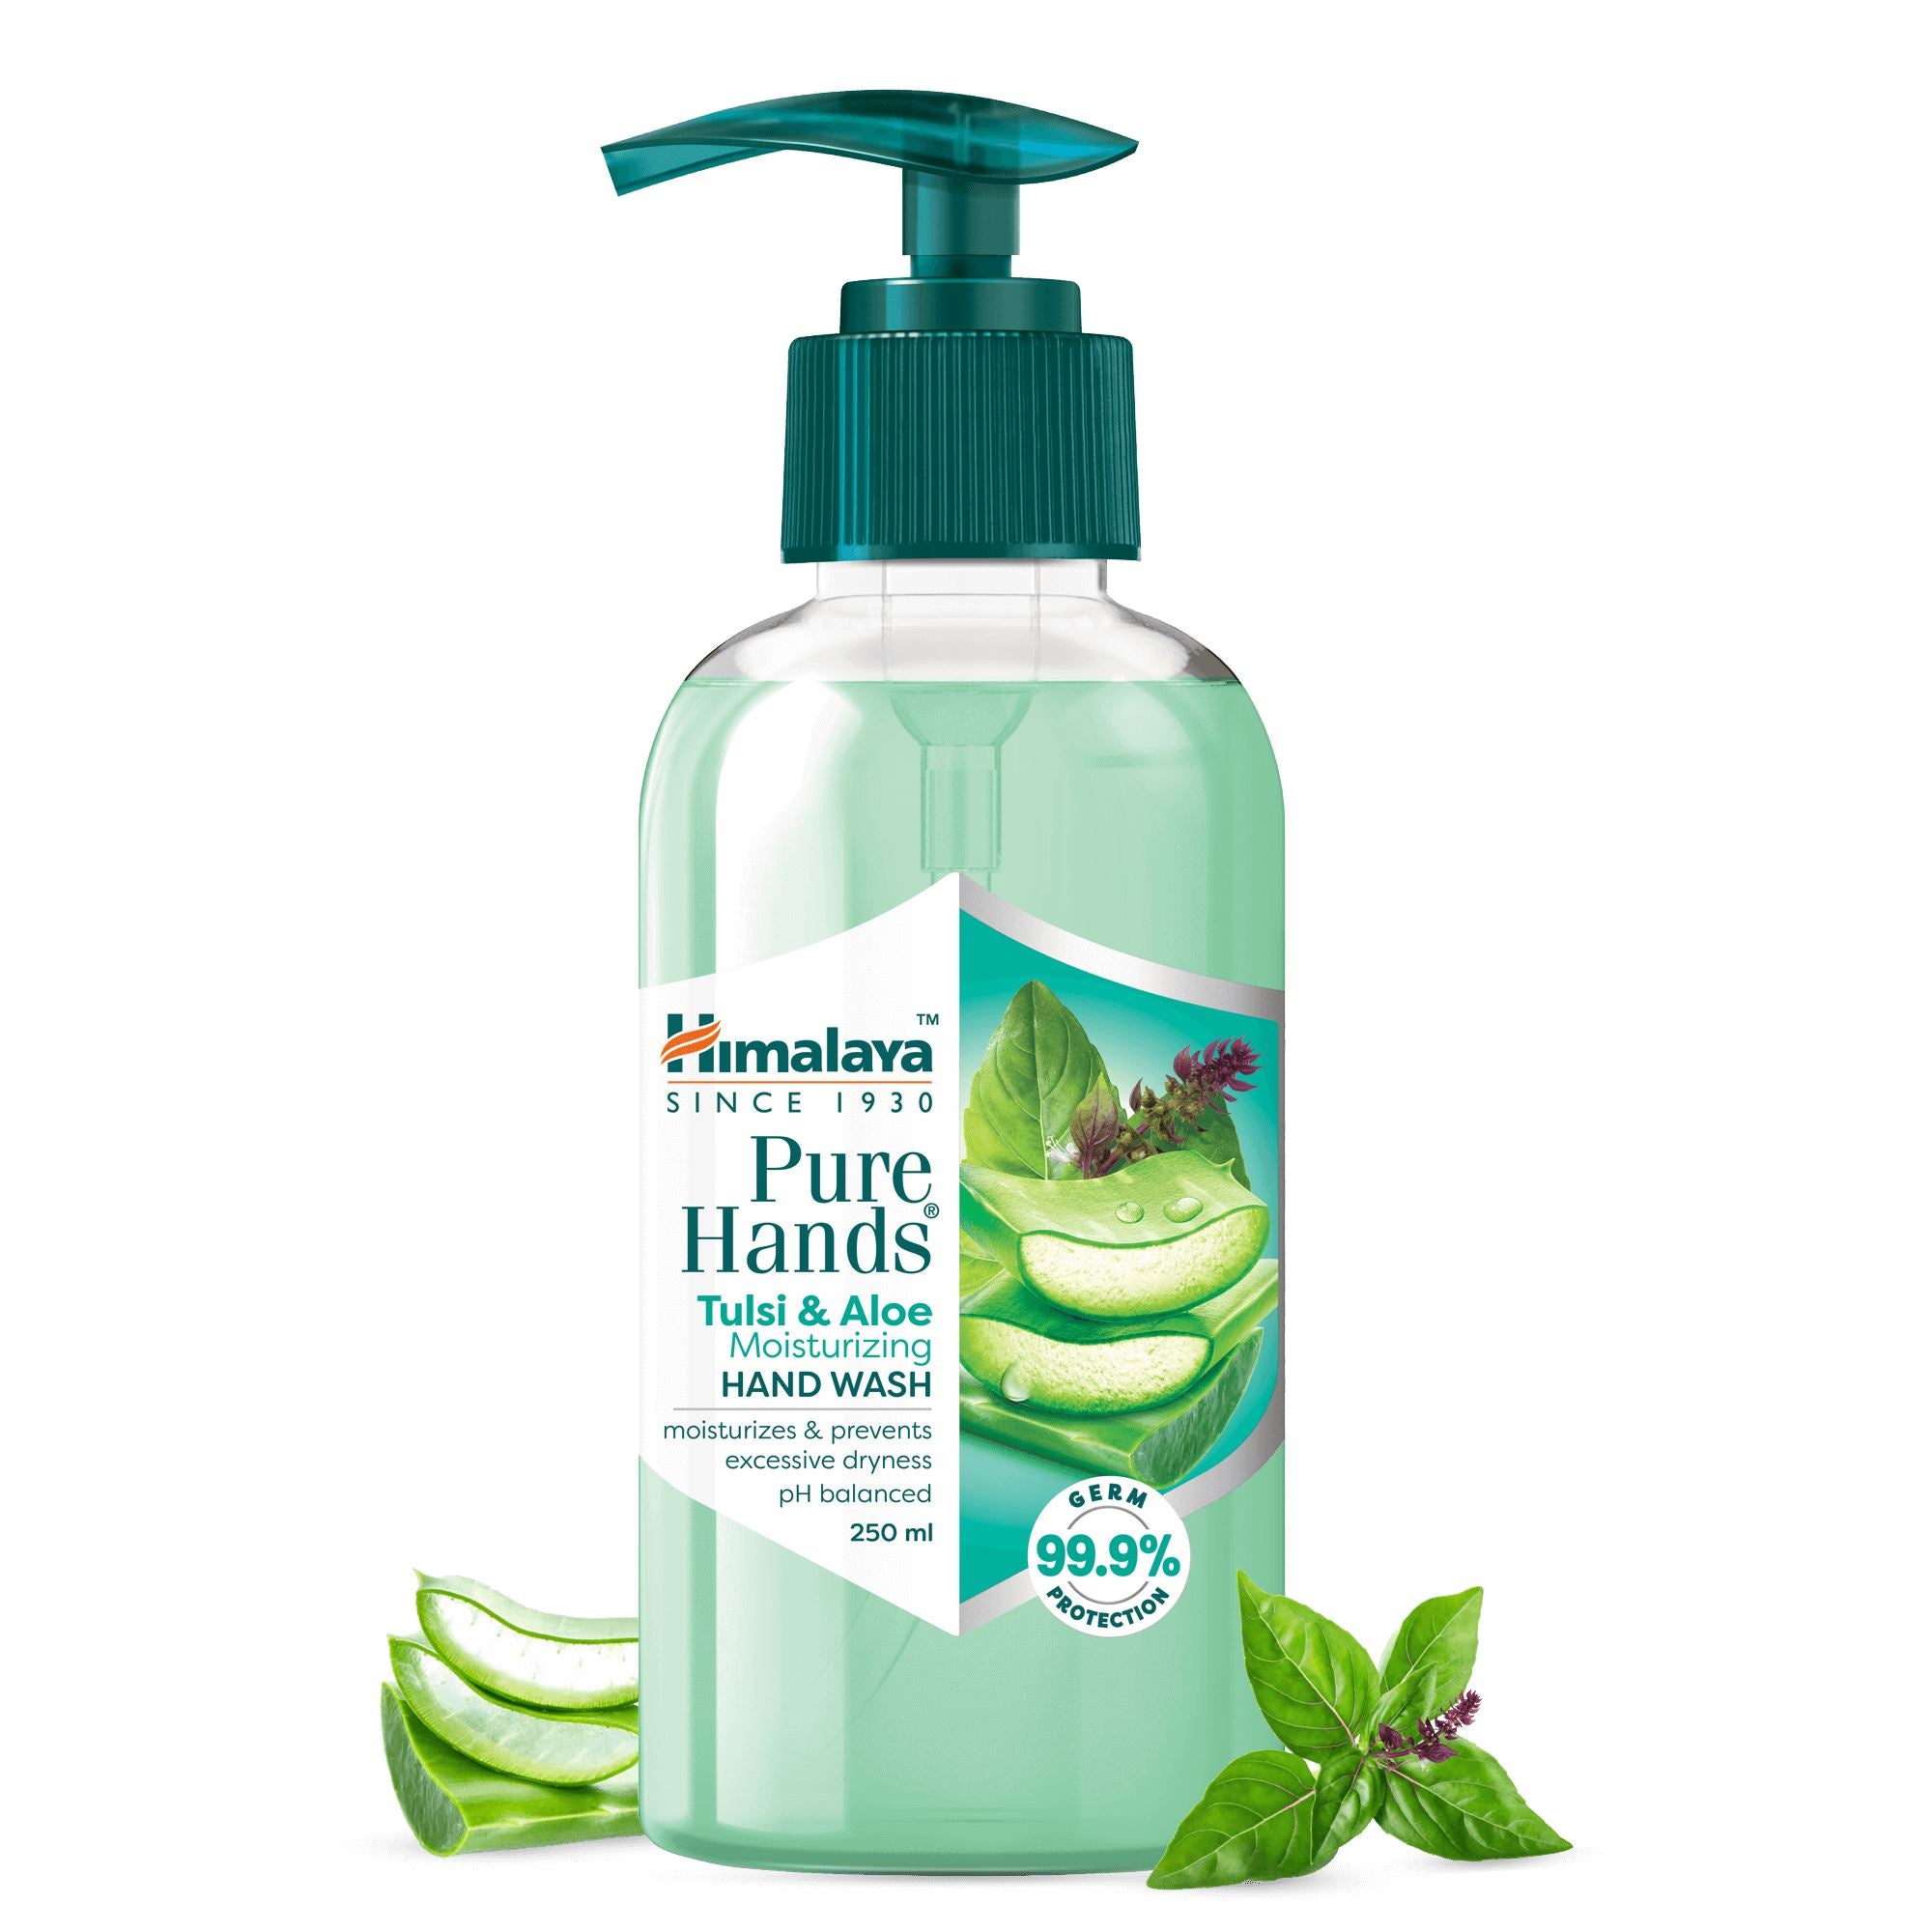 Himalaya Pure Hands Tulsi & Aloe Moisturizing Hand Wash - Helps protect hands from germs